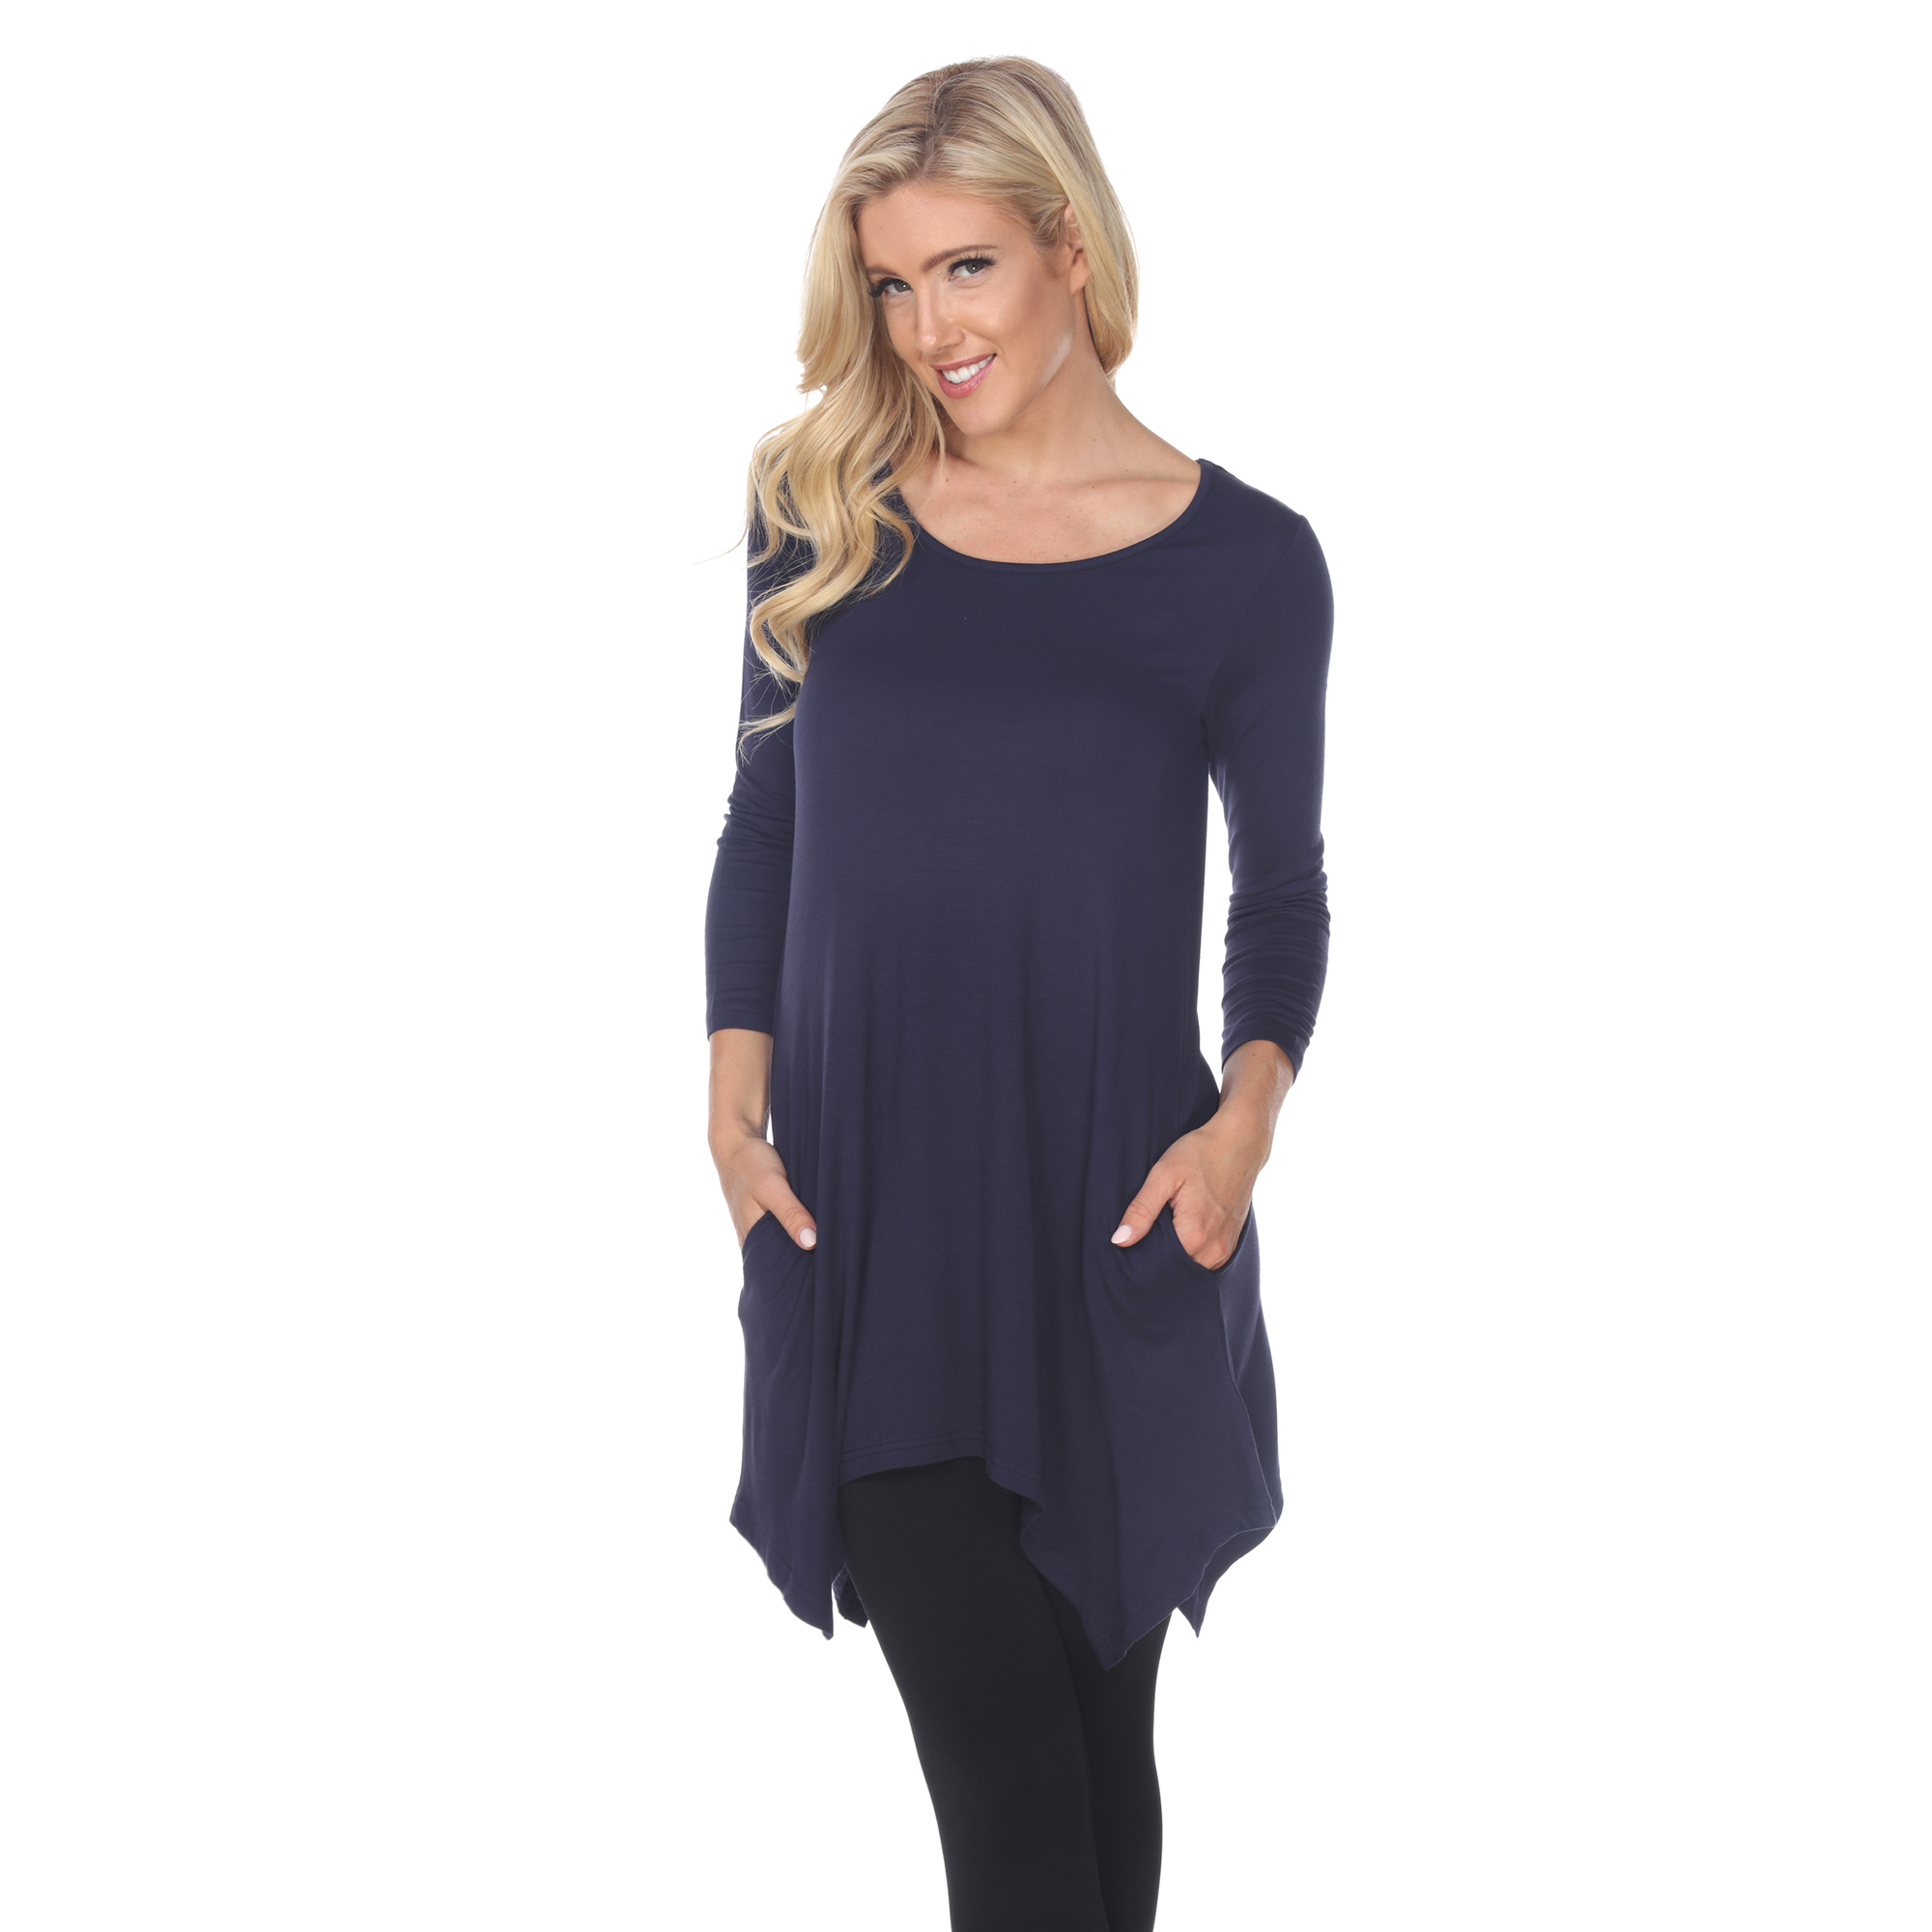 White Mark Women's Quarter Sleeve Tunic Top With Pockets - Navy, 5X